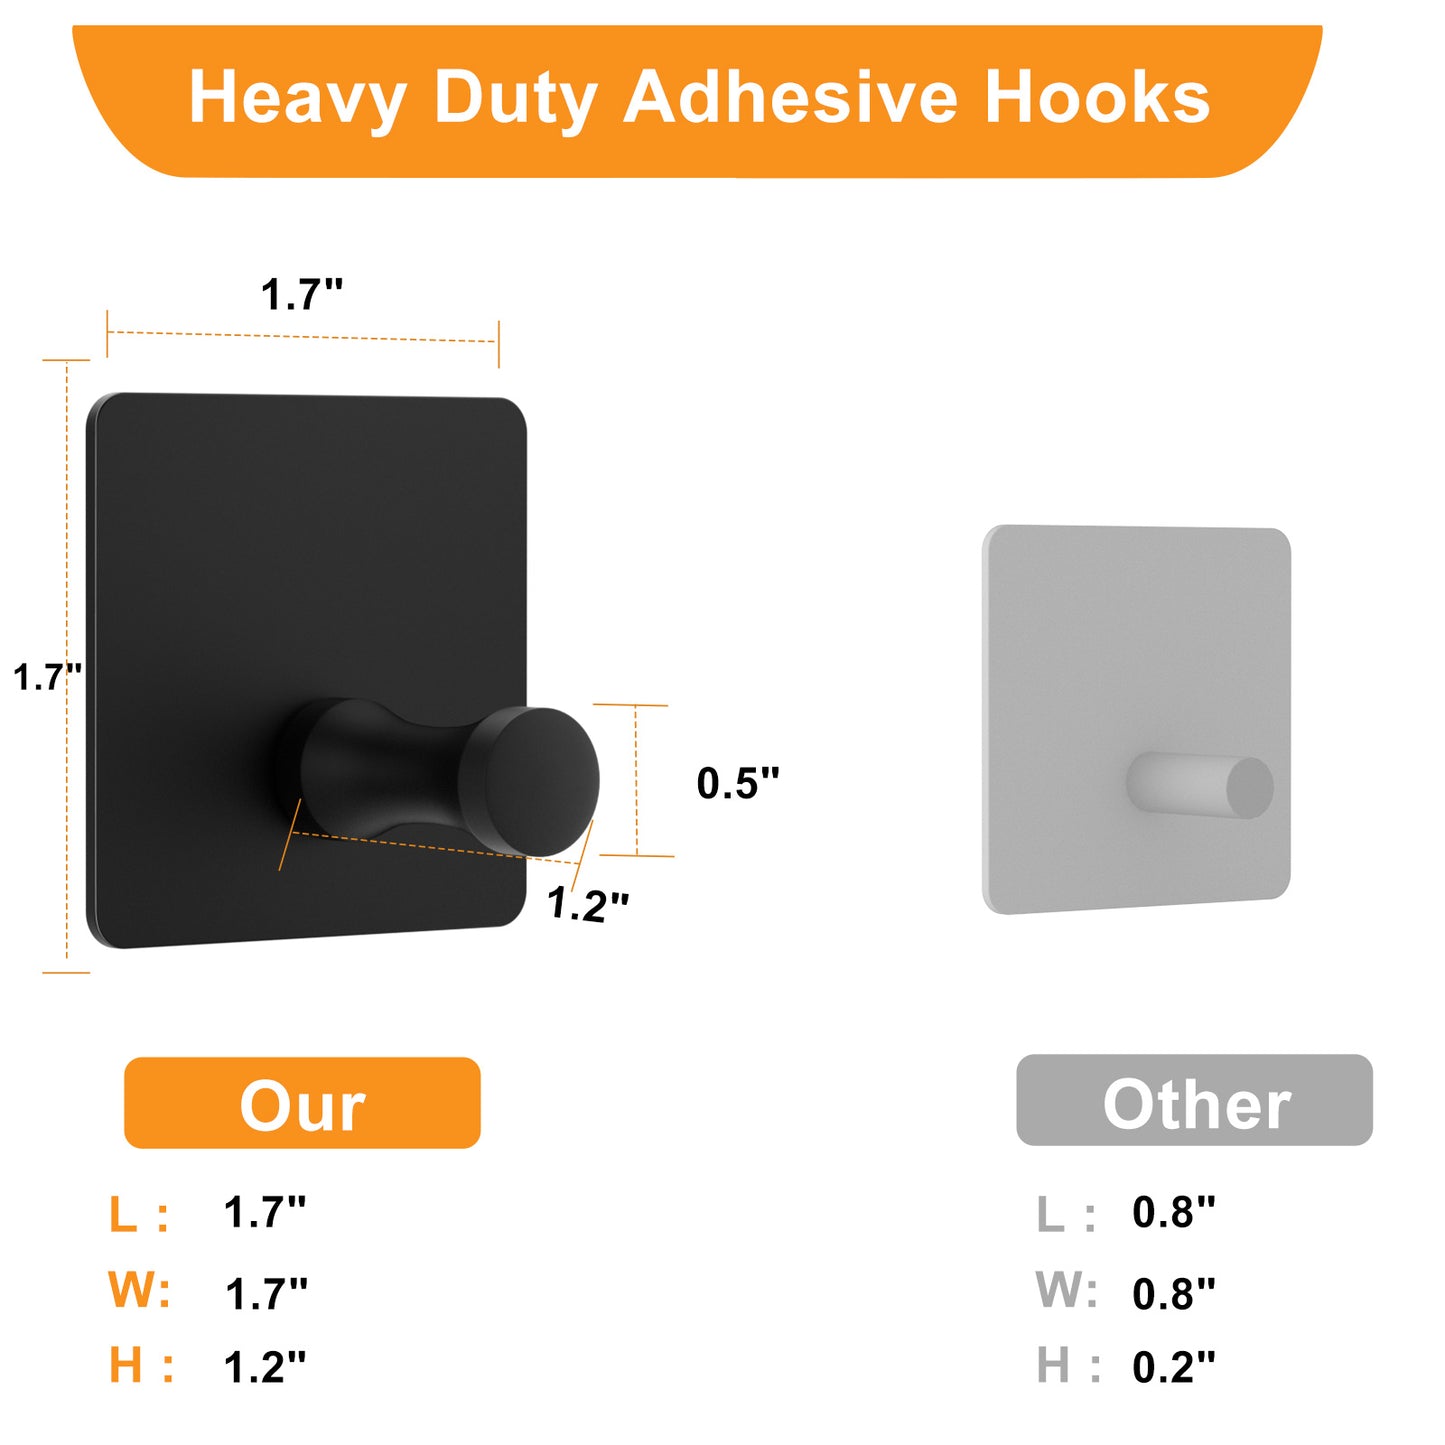 Adhesive Hooks,Self Sticky Hooks for Kitchen Utensils,Heavy Duty Hooks Suitable Hanging Hats,Stainless Steel Utility Hooks for Bathrooms Wall Hanging Towel,Matte Black No Damage Wall Hangers-4packs